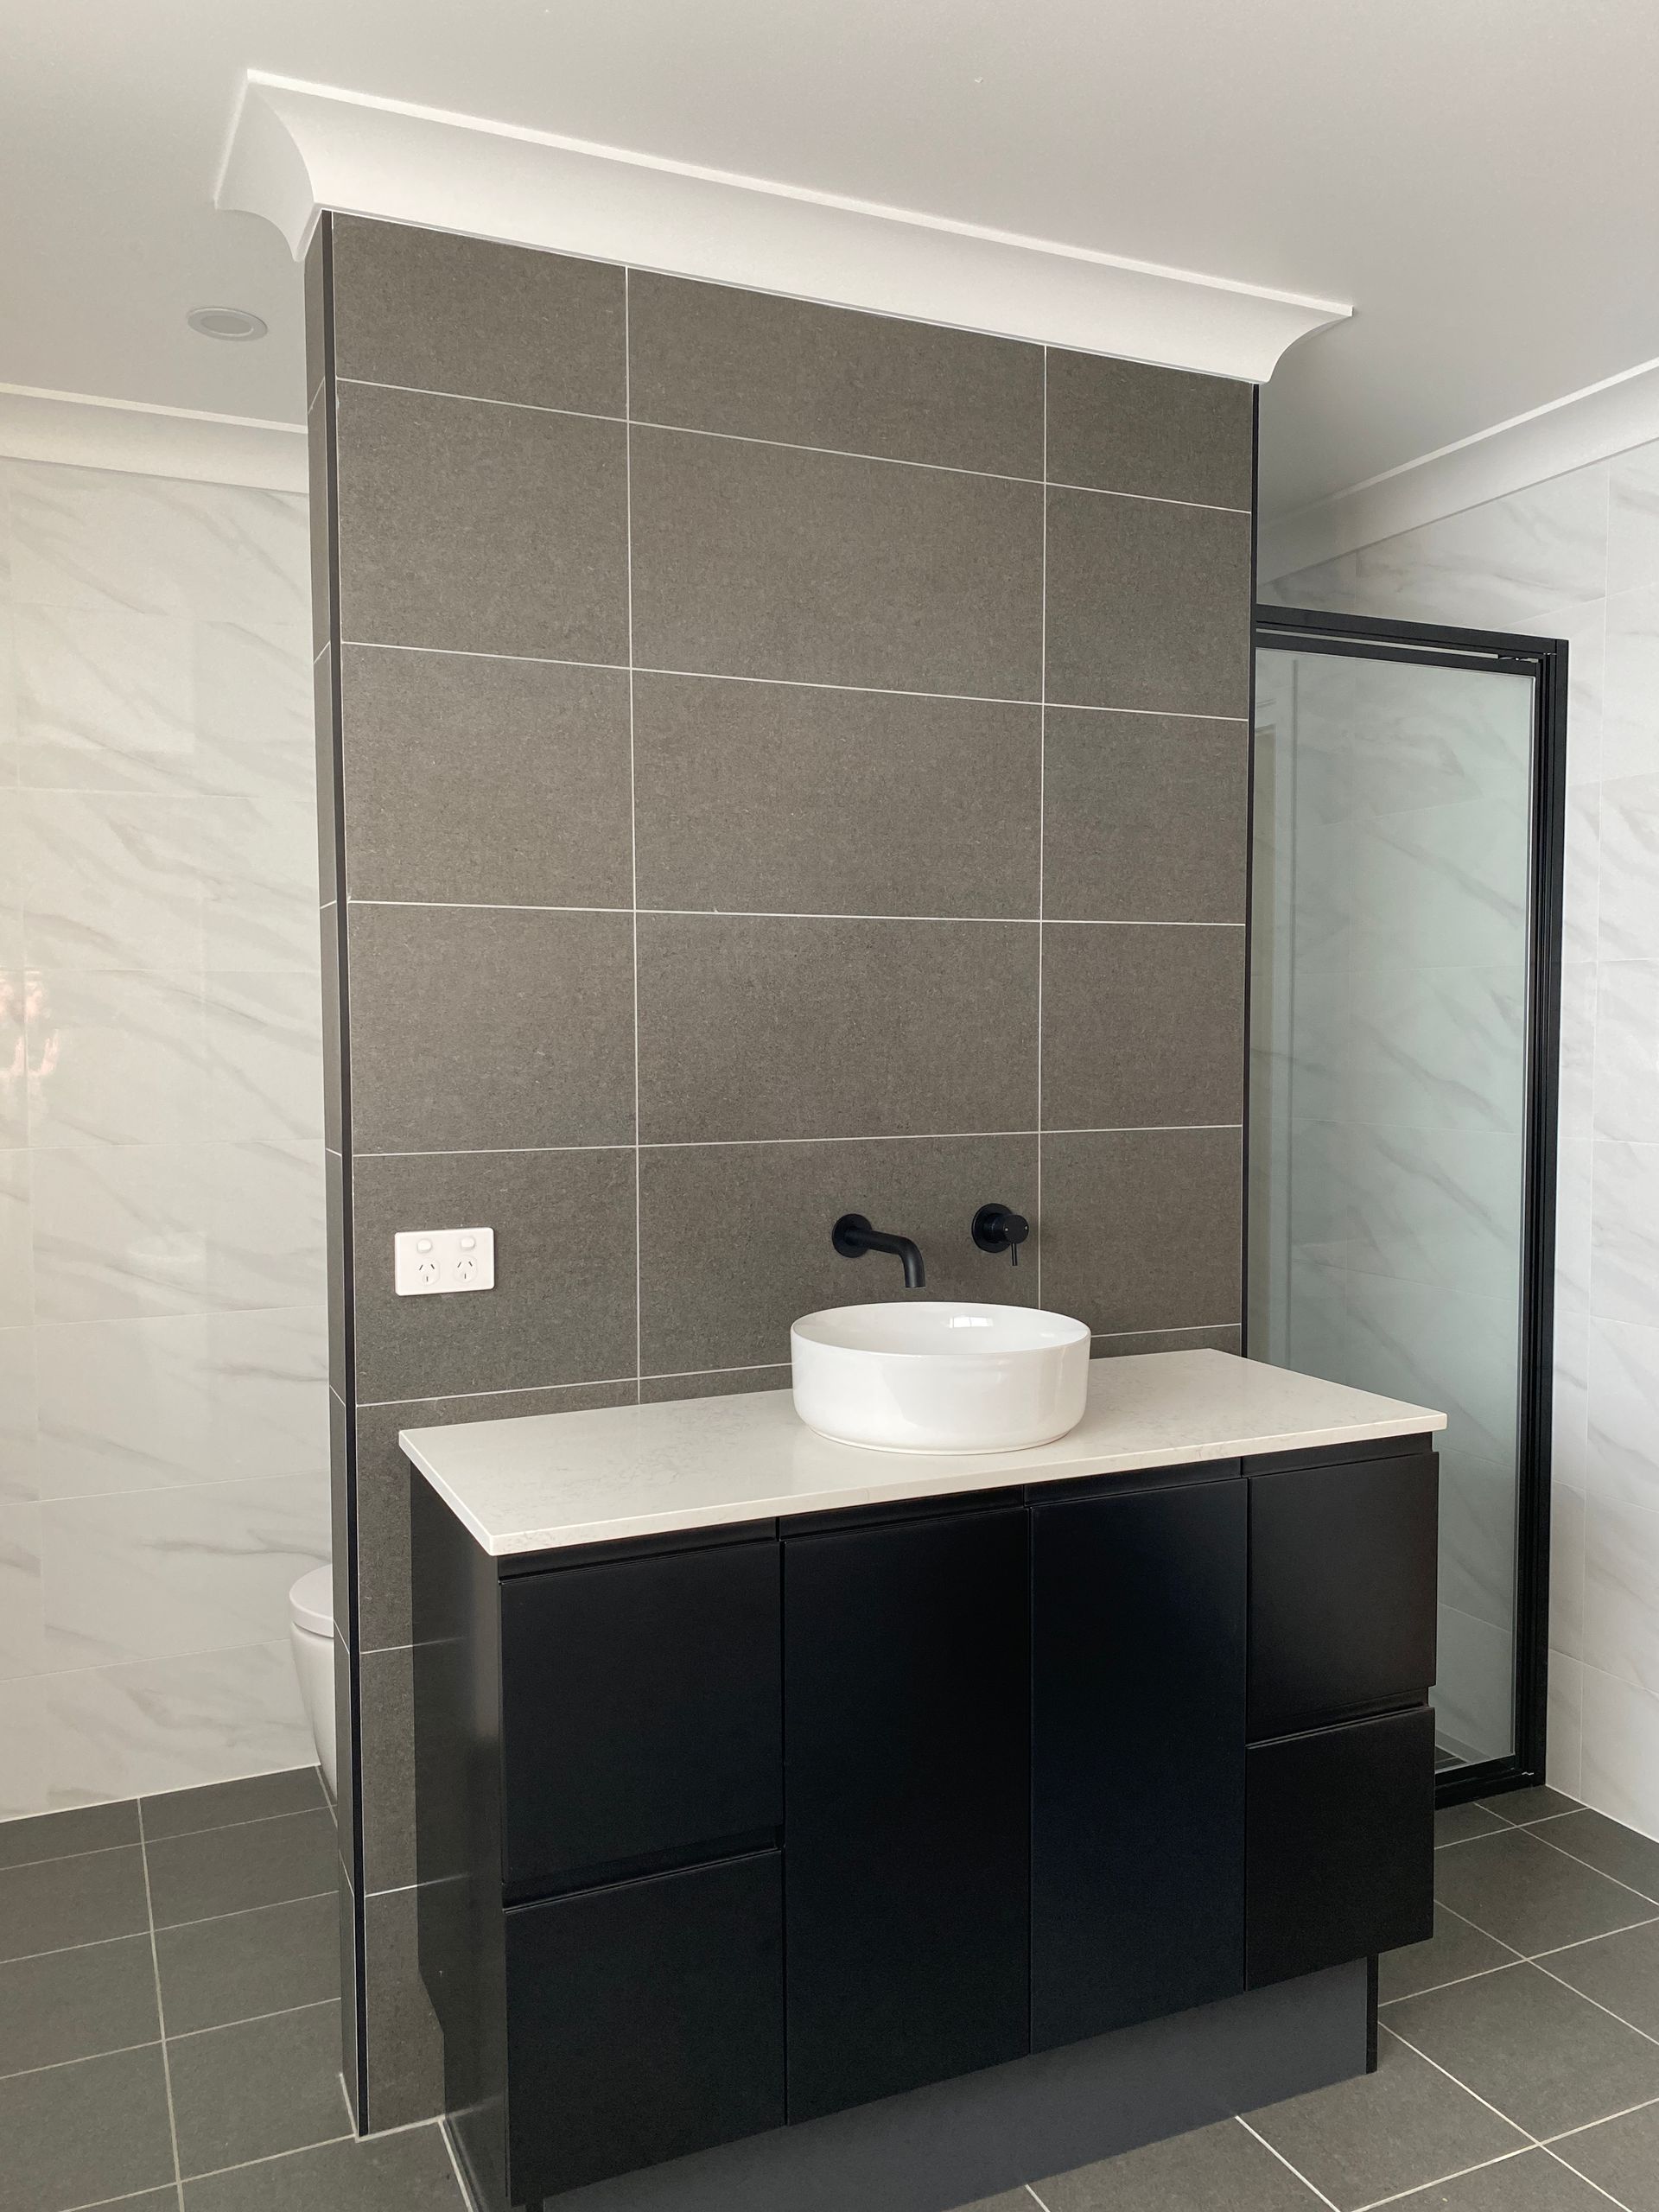 Washbasin With Grey Tiles and Black Cabinets — Kitchen Renovations in Dubbo, QLD